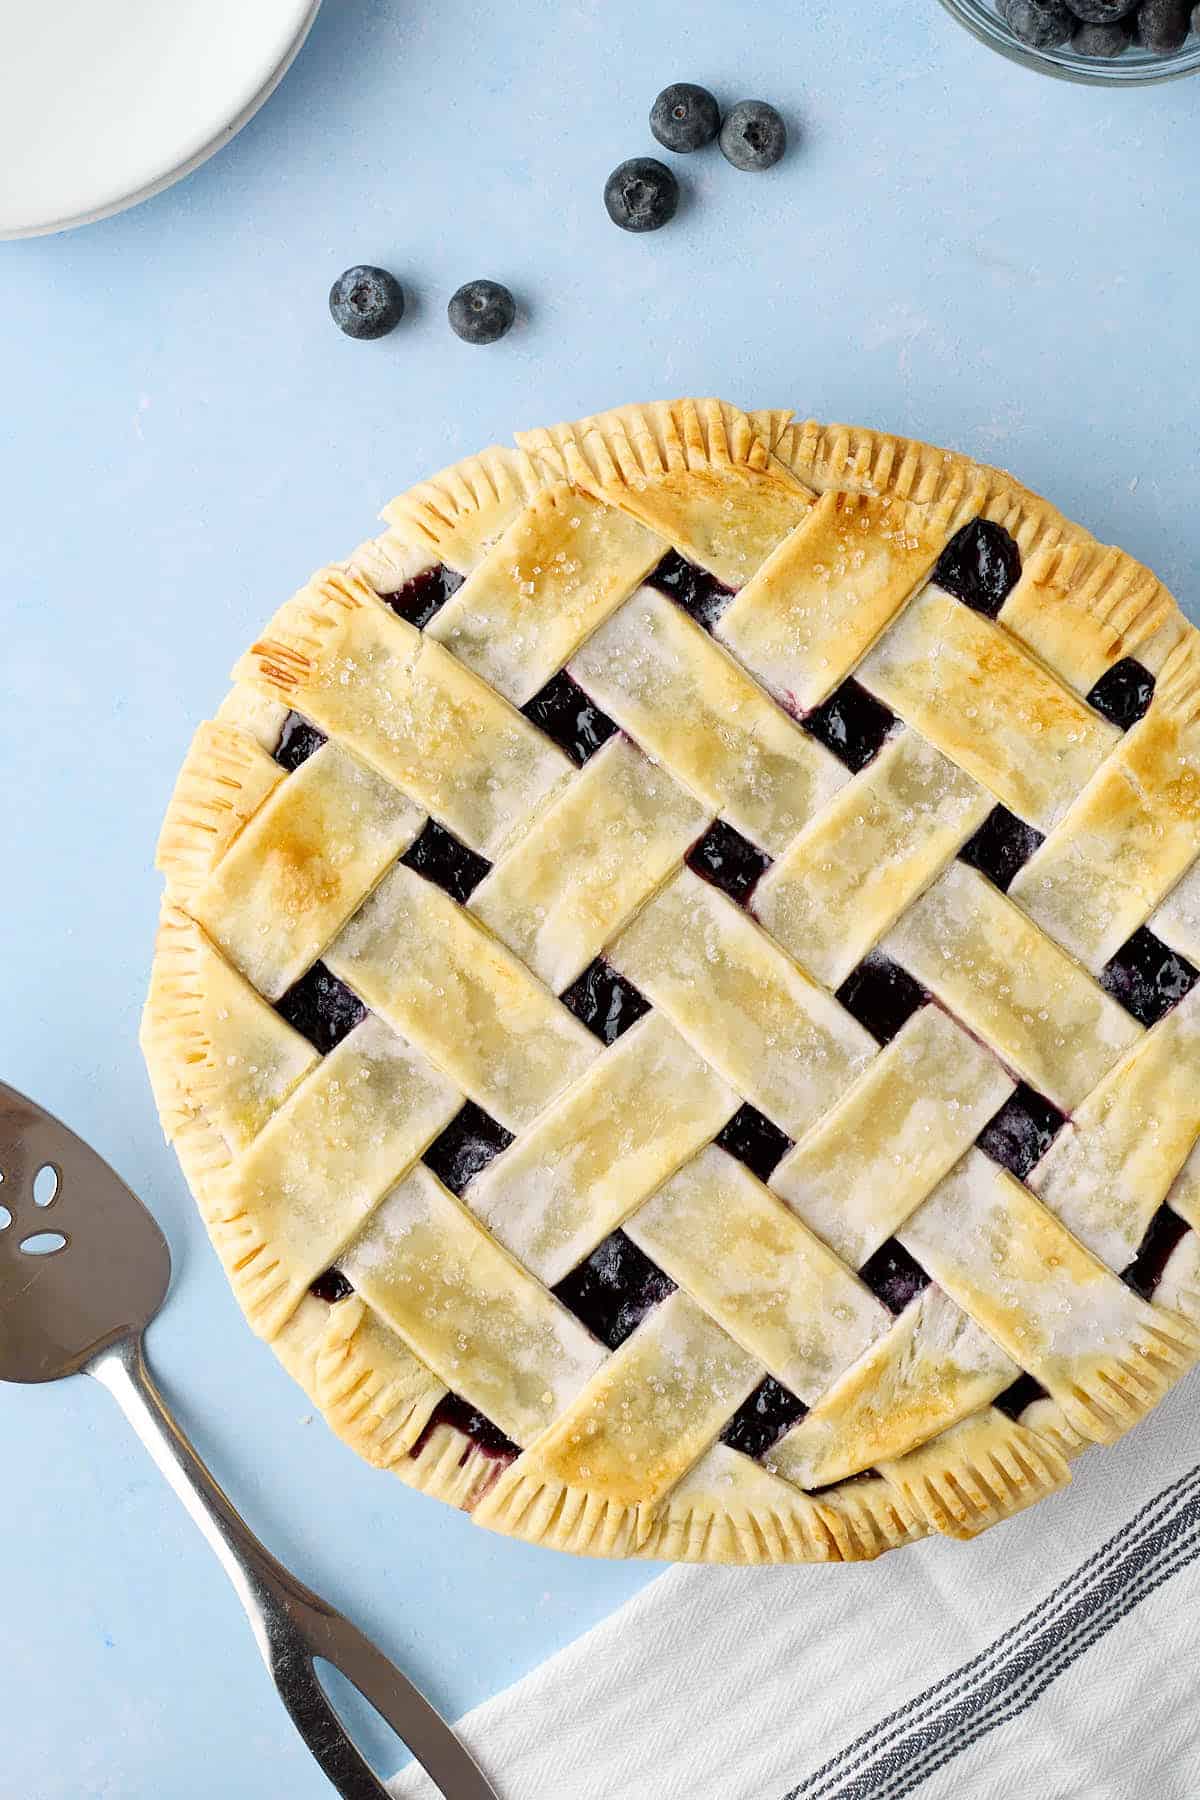 An overhead shot of a baked blueberry pie with lattice crust.